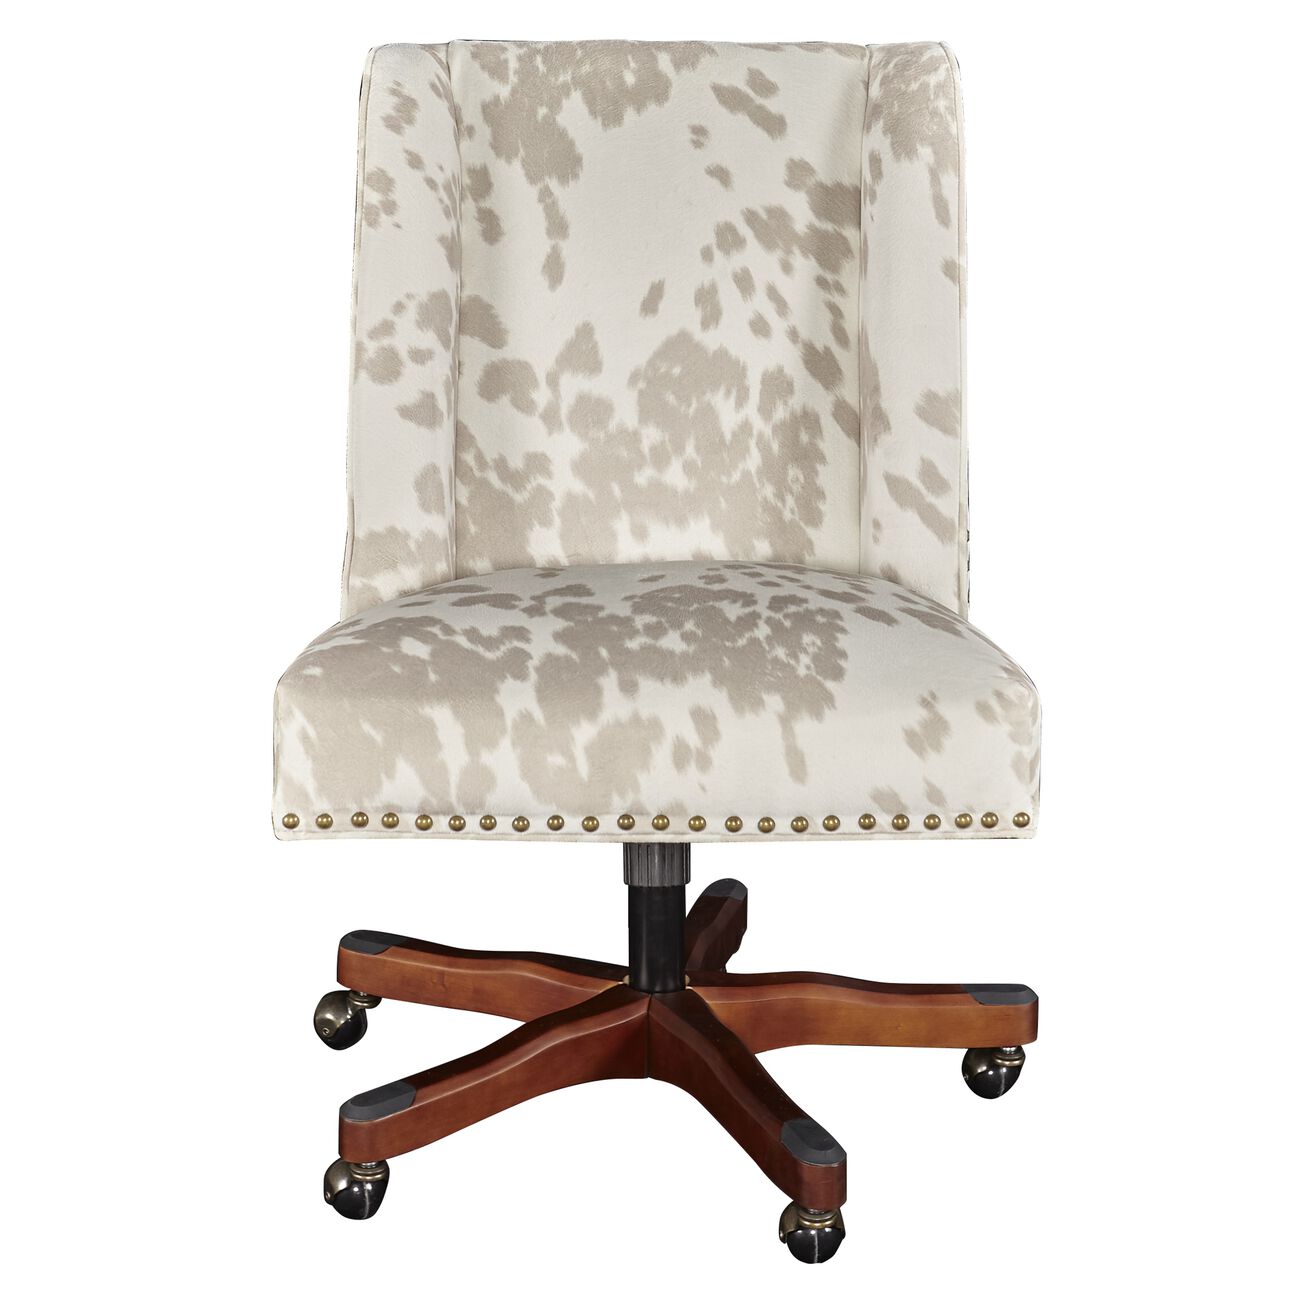 Cow Print Fabric Upholstered Swivel Office Chair, White and Brown